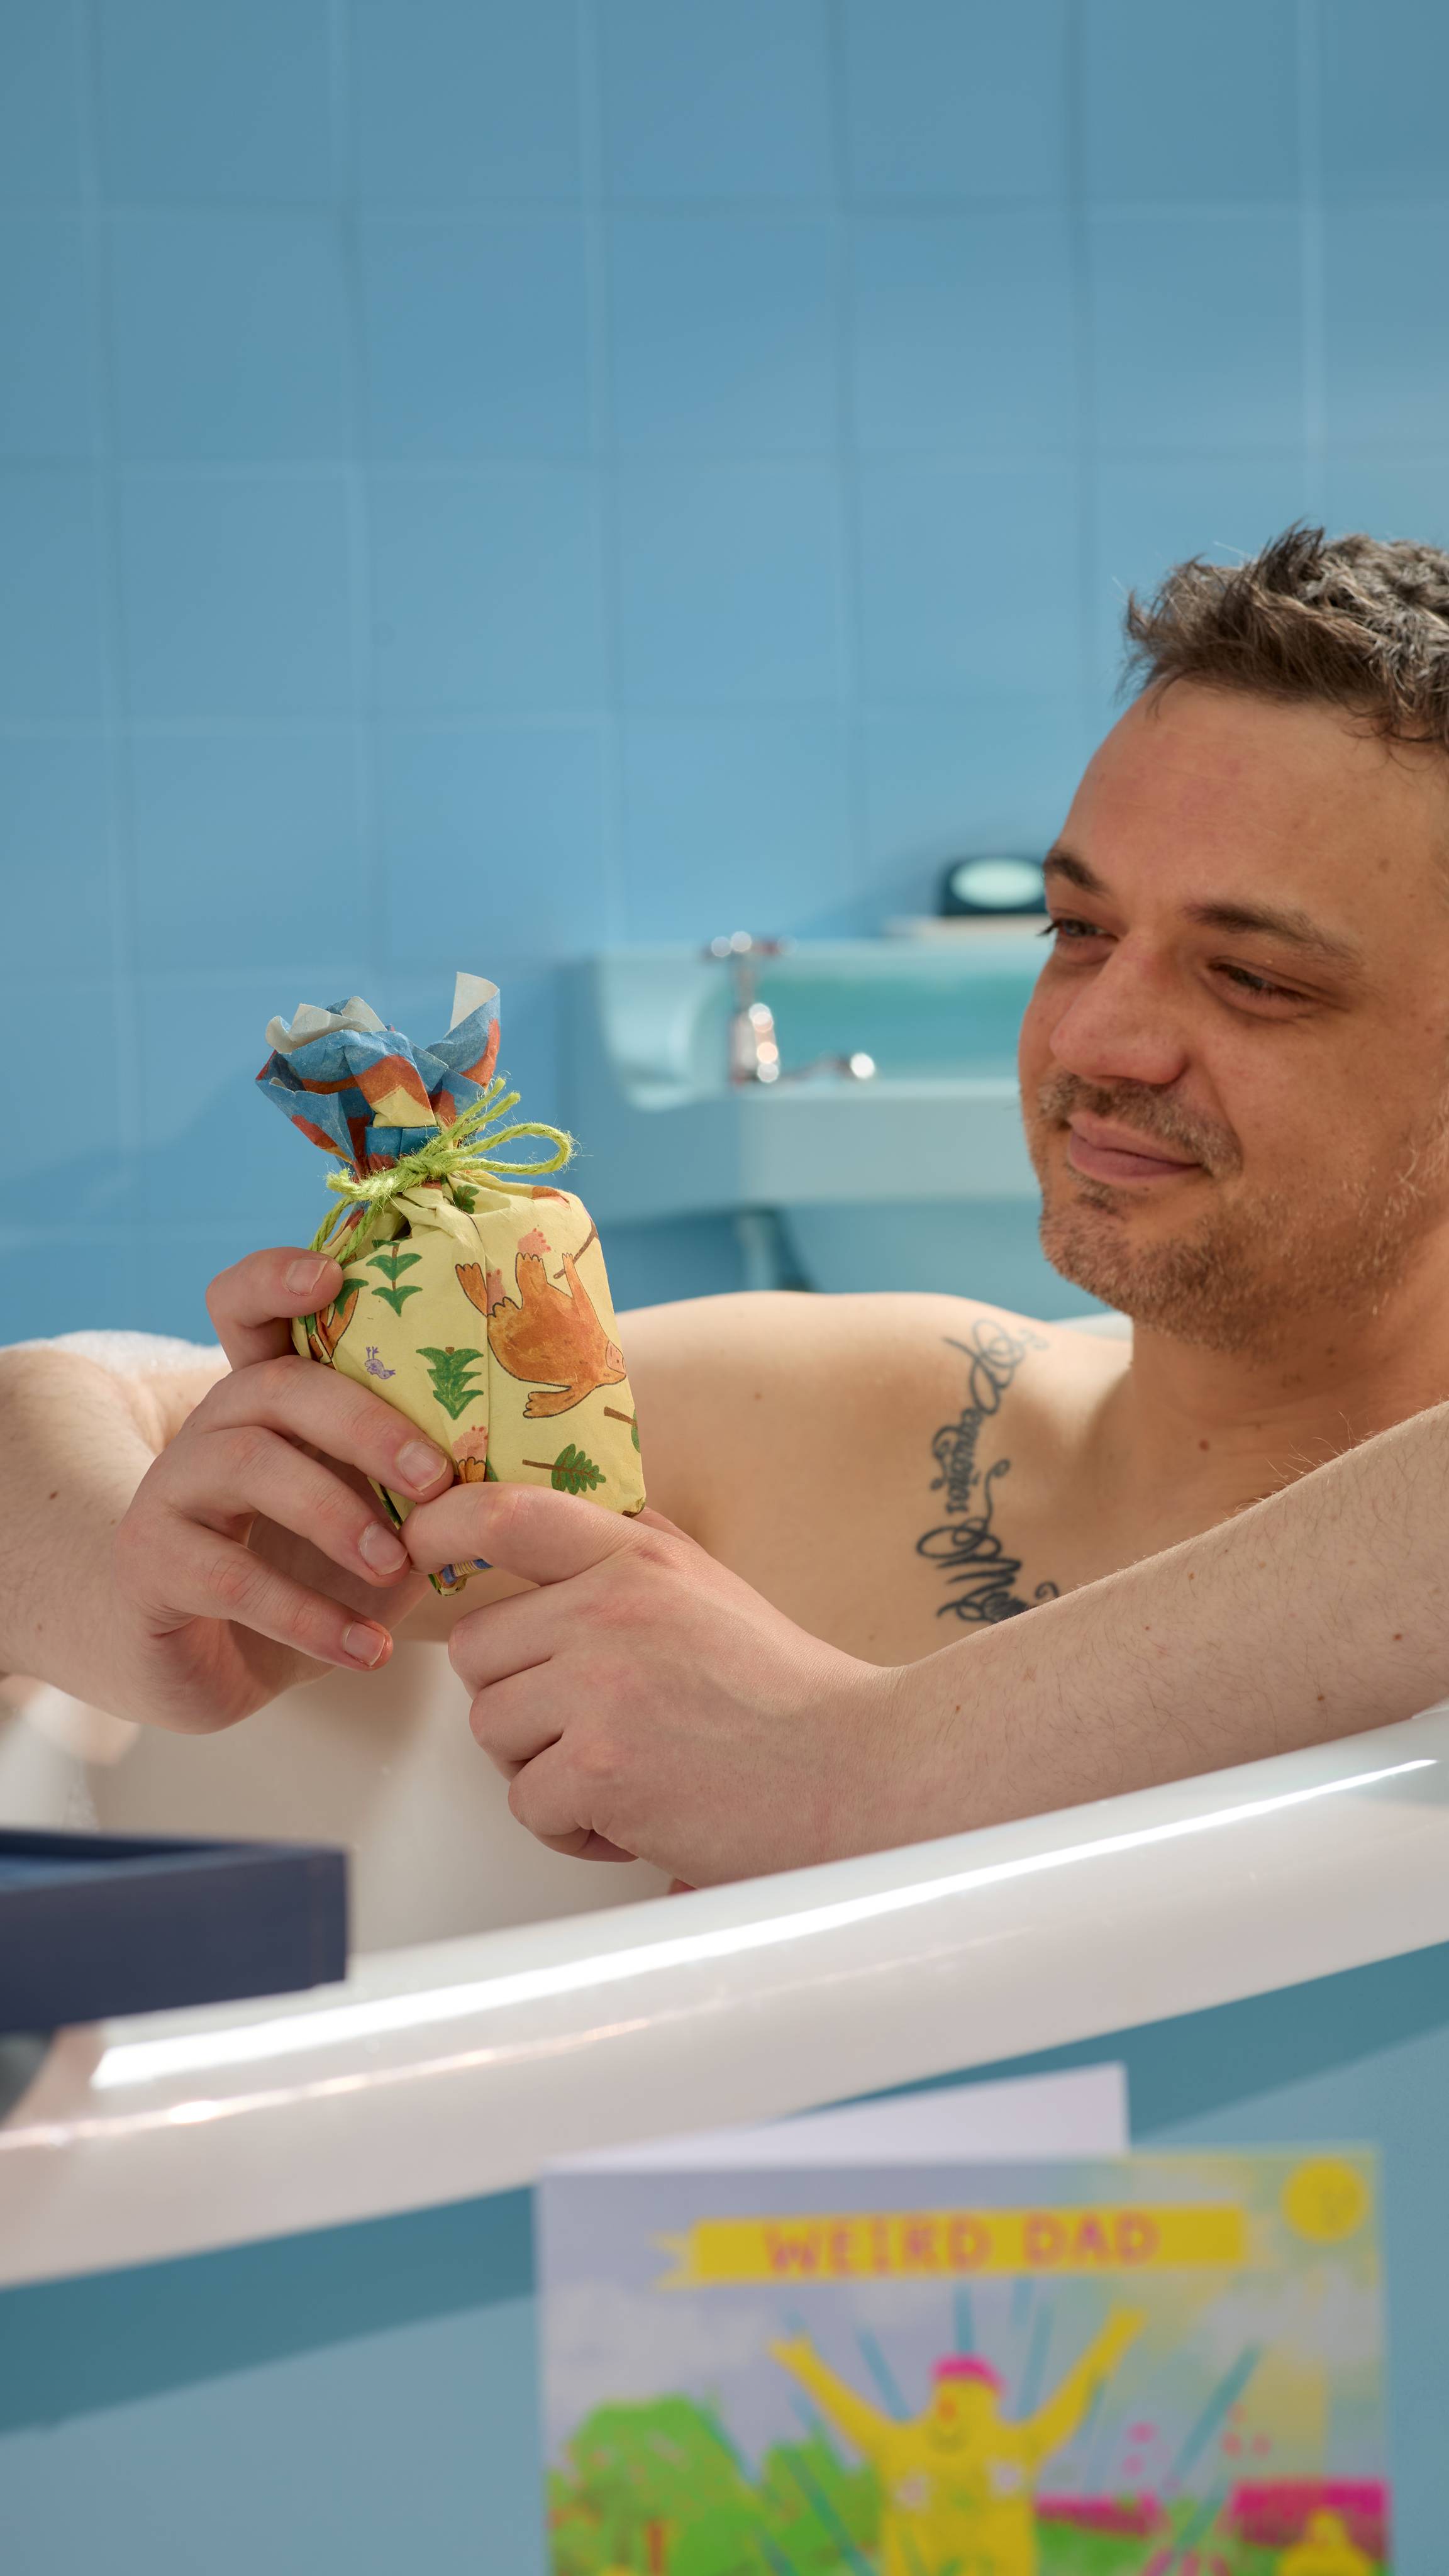 The Model is sitting in a roll-top bathtub in a blue, tiled room holding a gift wrapped in the Big Foot Goes Camping lokta wrap and tied with green string. 